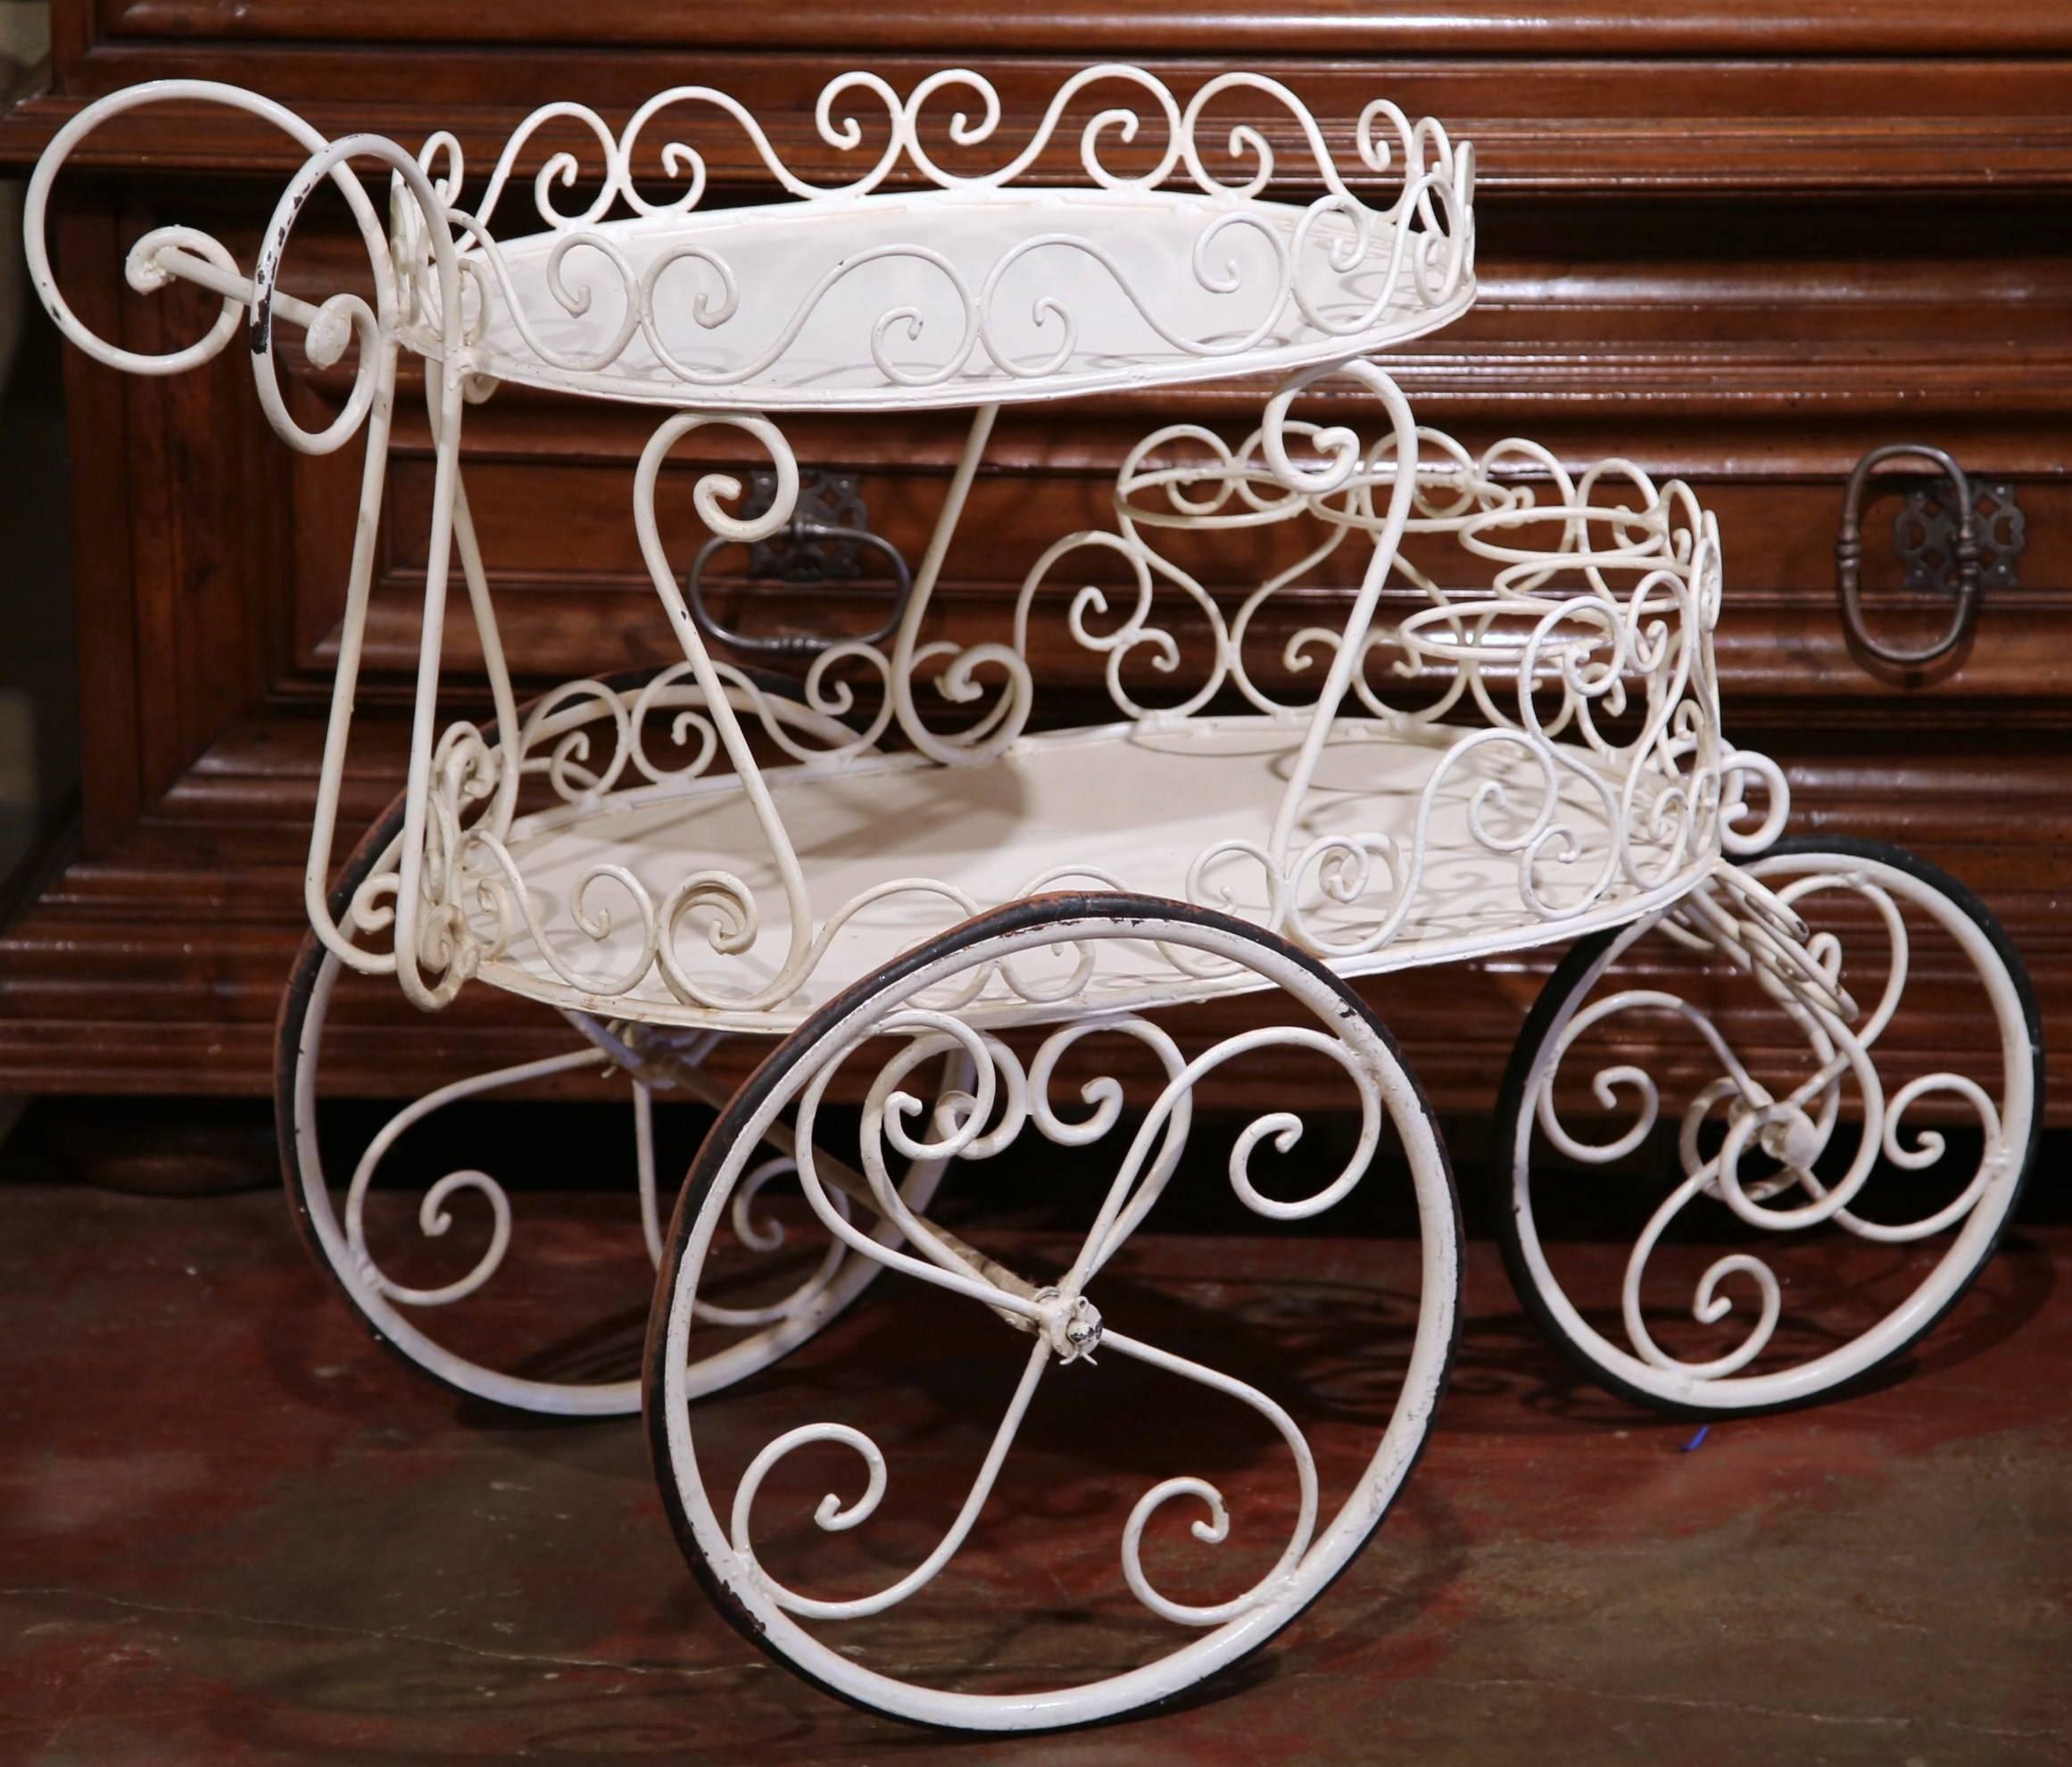 This elegant three-wheel cart was crafted in western France, circa 1920. The antique white iron cart stands on three wheels with rubber tires and features two levels; the top plateau with an ornate handle, has a decorative gallery around the